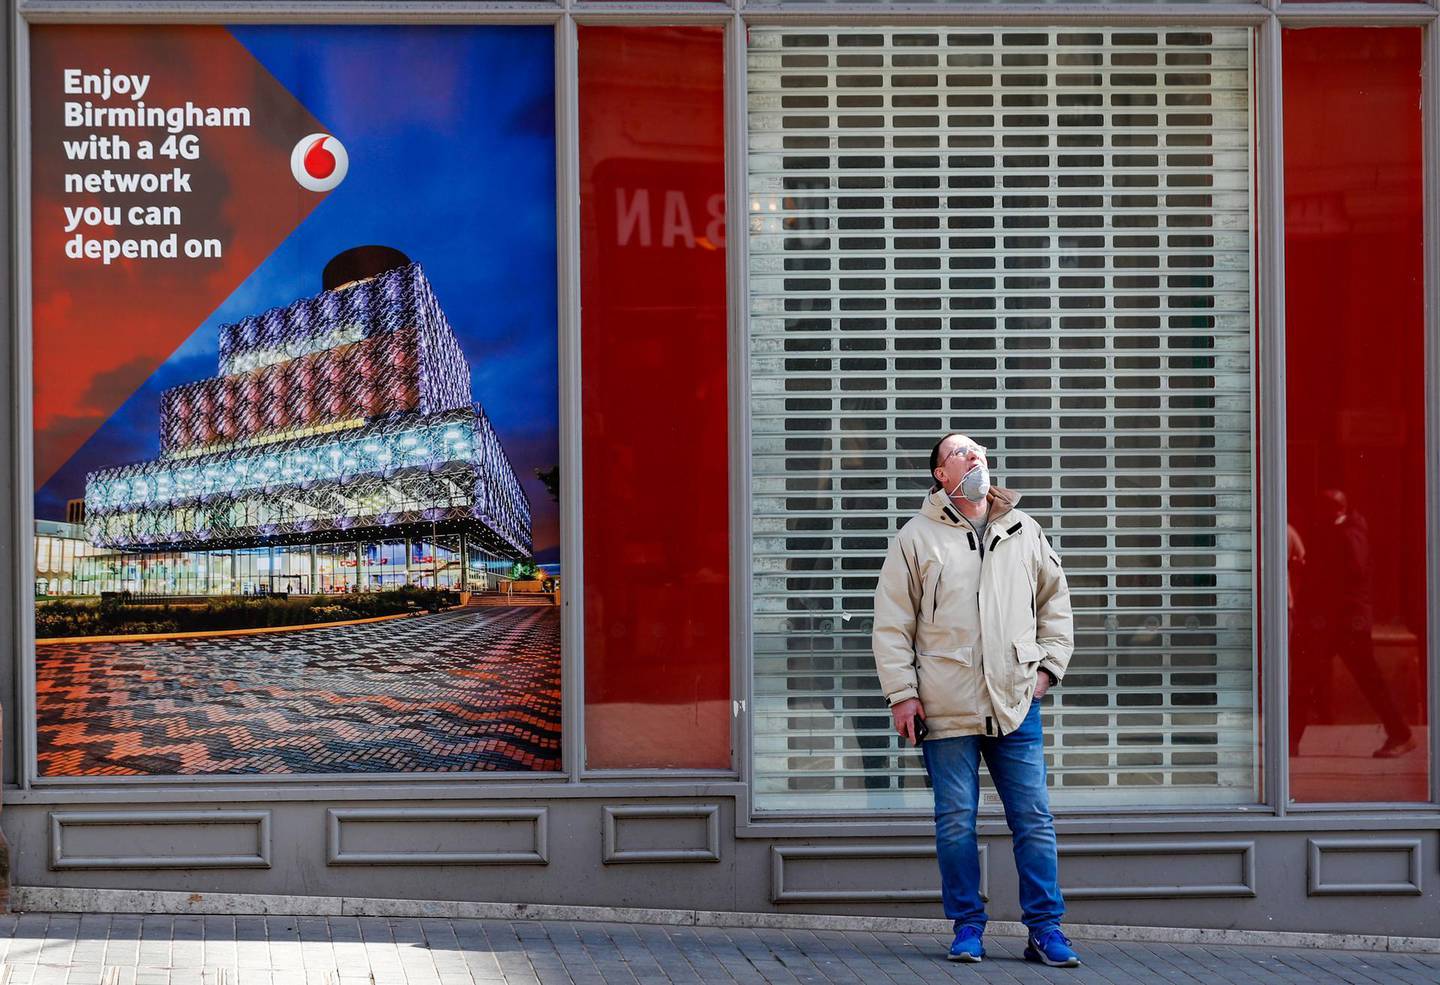 A pedestrian, wearing a protective face mask, stands outside a Vodafone Group Plc store near a advertising message about their 4G network in Birmingham, U.K., on Monday, April 6, 2020. Telecom masts that enable the next generation of wireless communication were set on fire in the U.K. in recent days, apparently by people motivated by a theory that the tech helps spread the coronavirus. Photographer: Darren Staples/Bloomberg